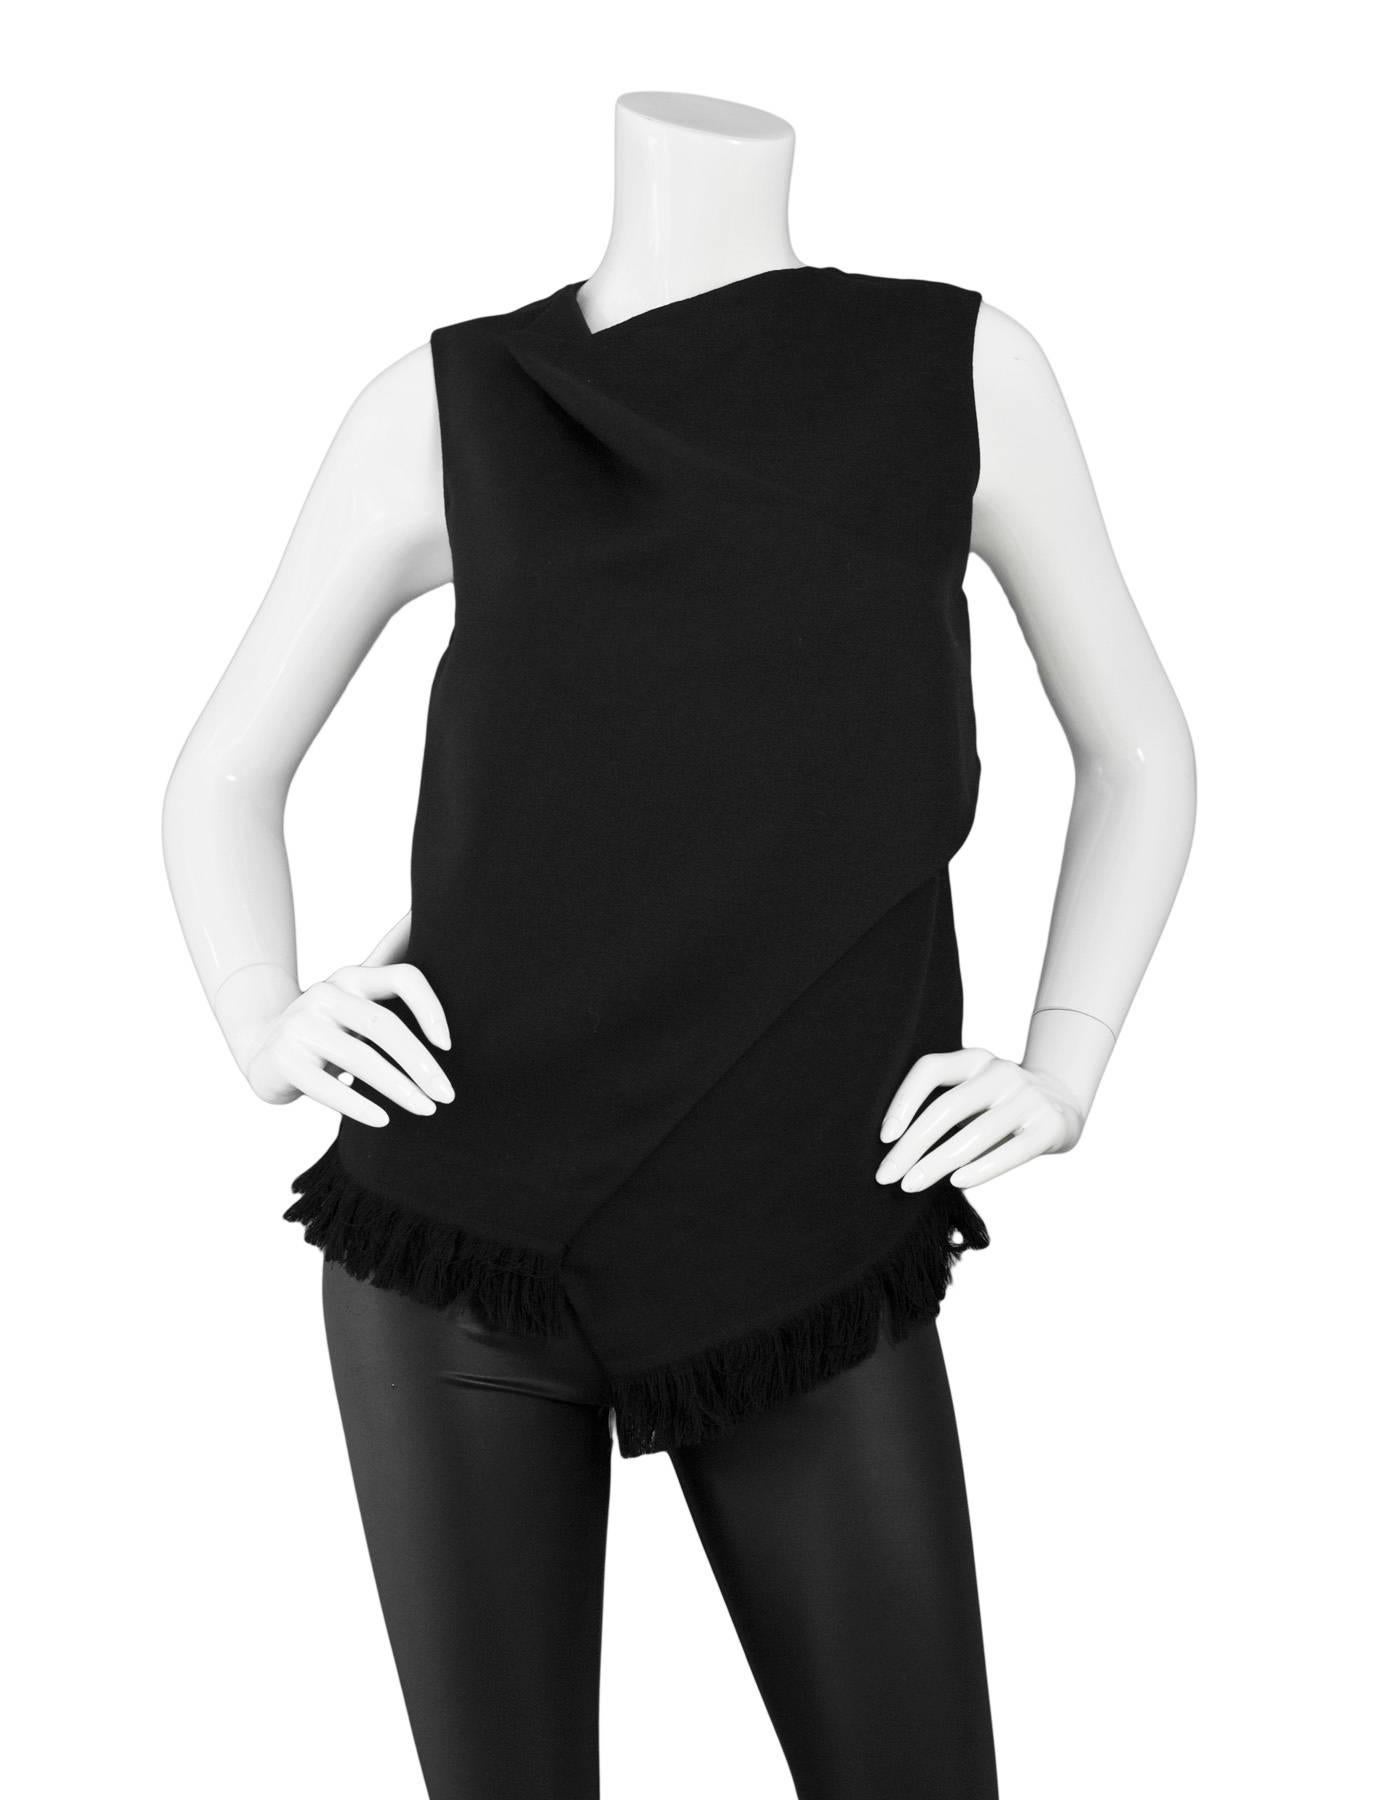 3.1 Phillip Lim Black Sleeveless Top With Fringe Sz 4 NWT
Features cowl neck and asymmetrical fringe hem

Made In: China
Color: Black
Composition: 100% Wool
Lining: None
Closure/Opening: Back zip closure
Exterior Pockets: None
Interior Pockets: